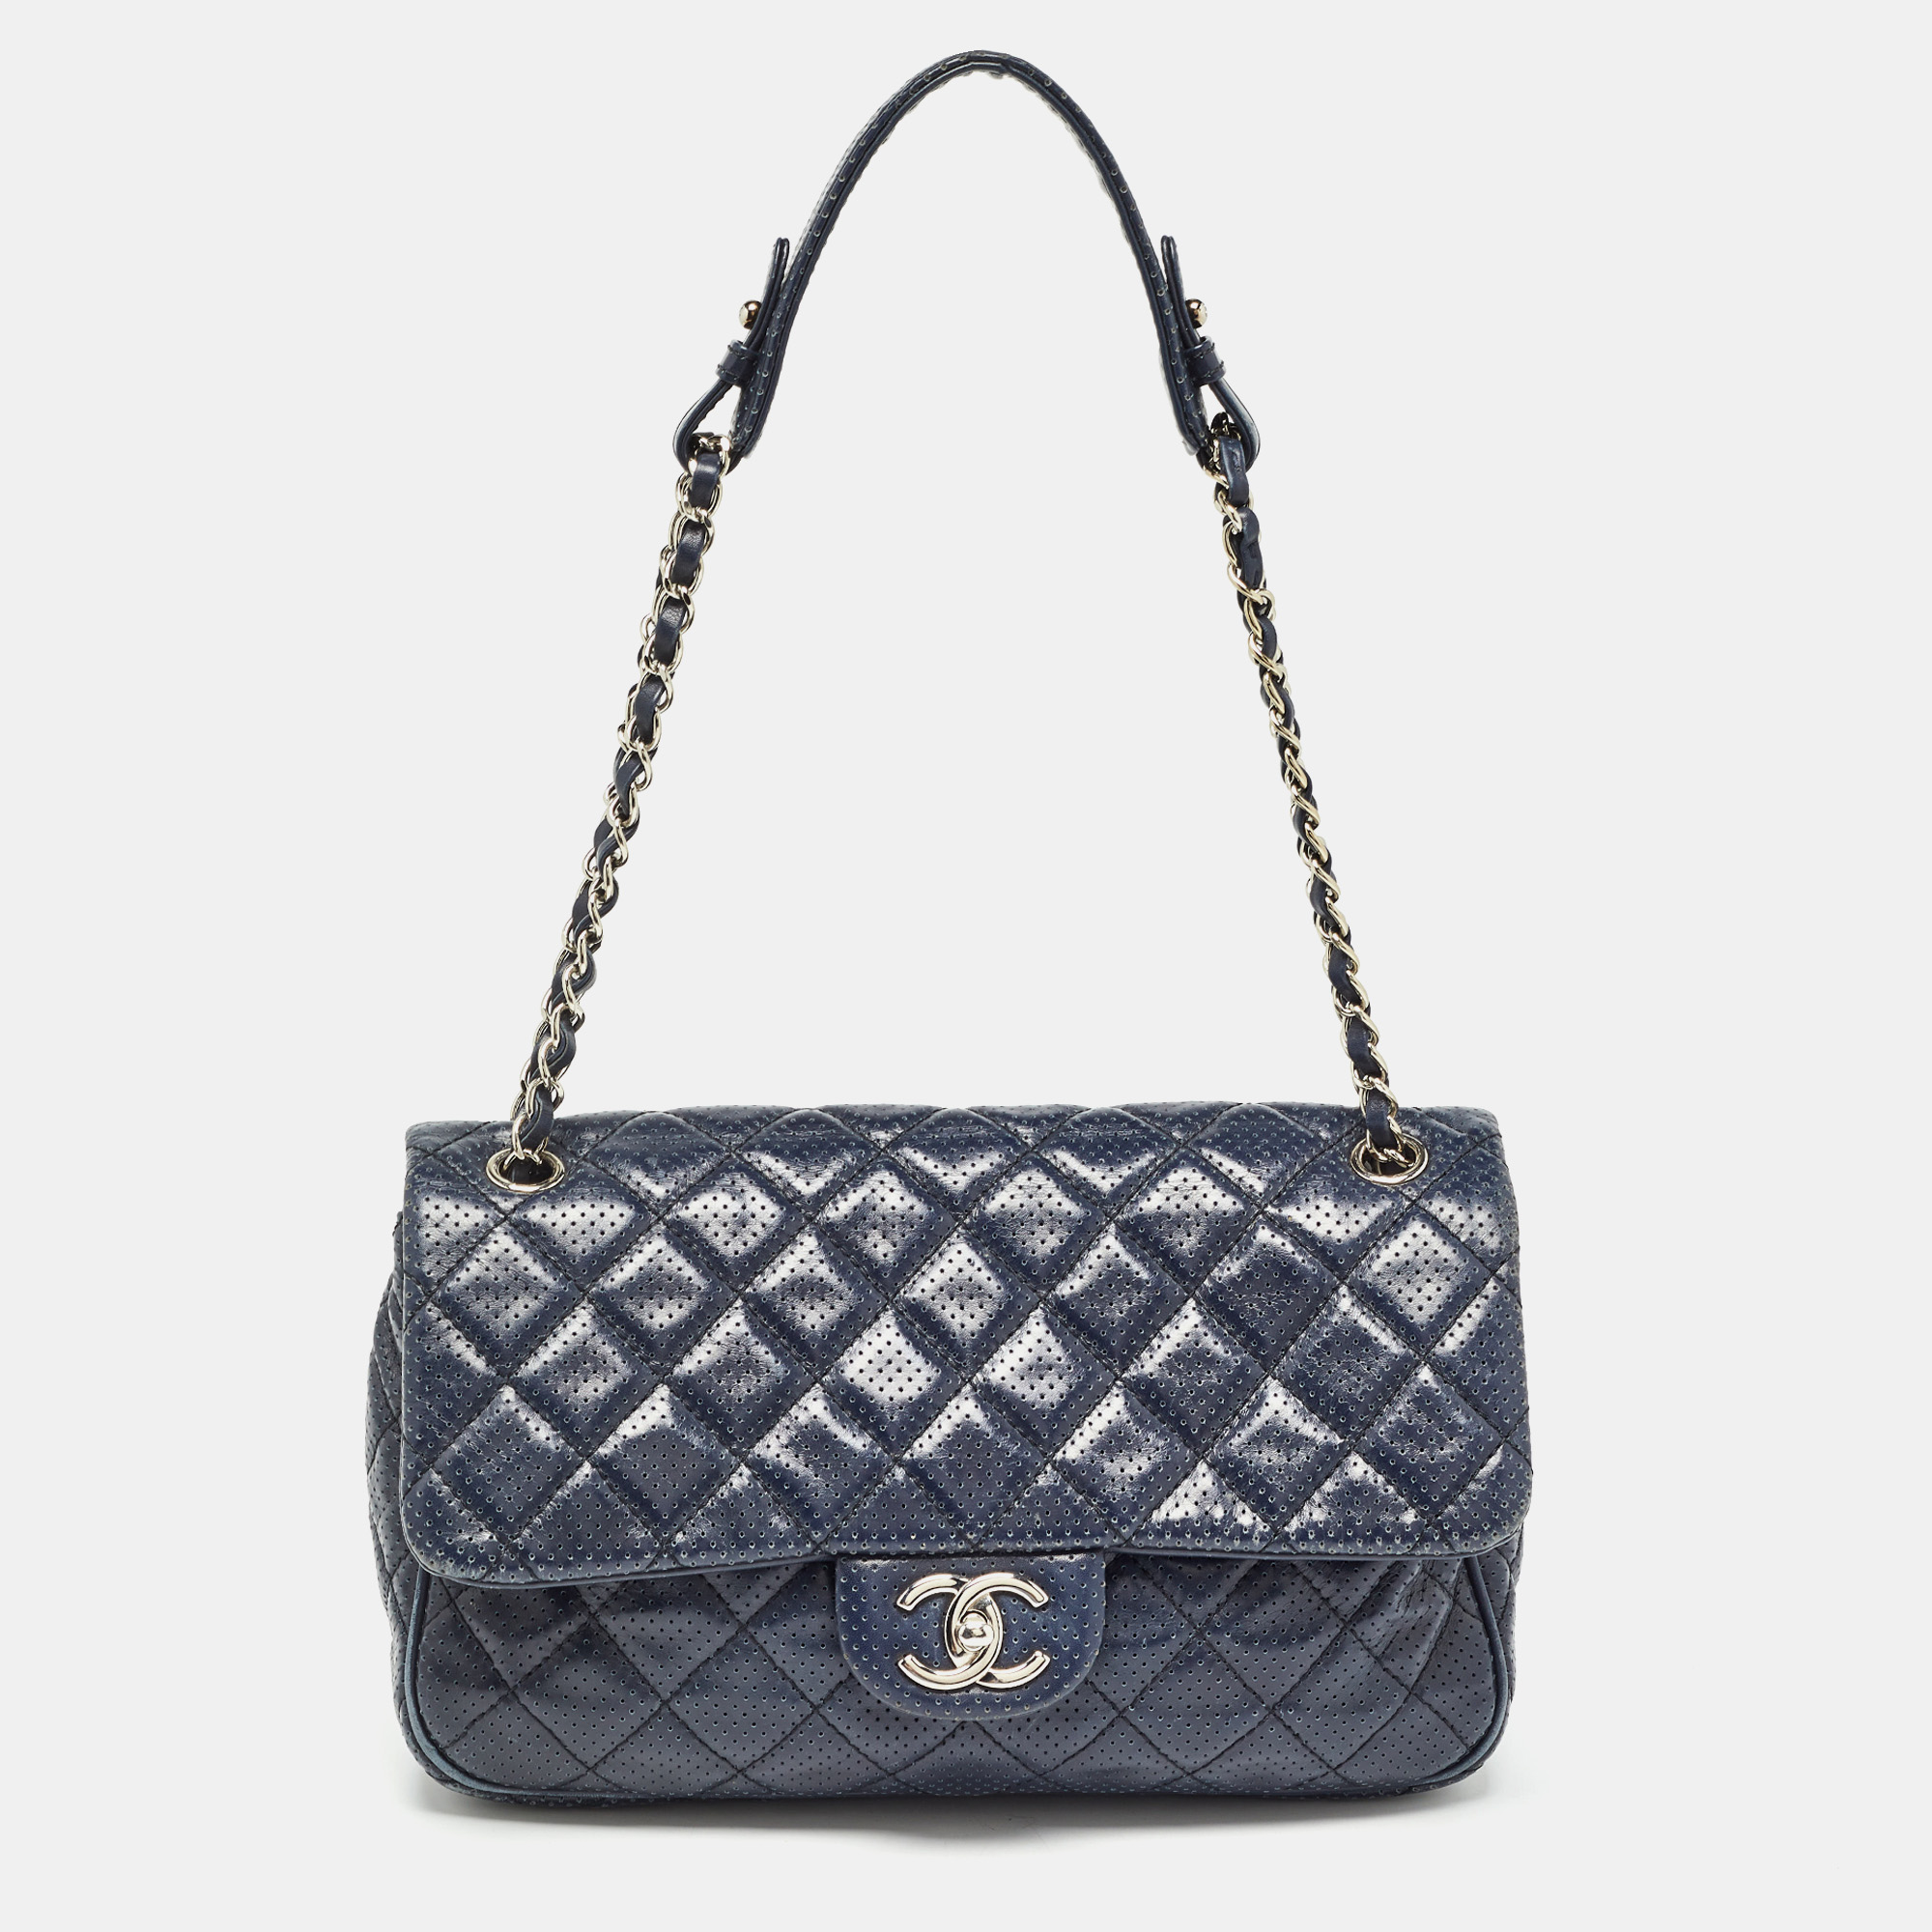 

Chanel Navy Blue Perforated Leather Punch Flap Bag